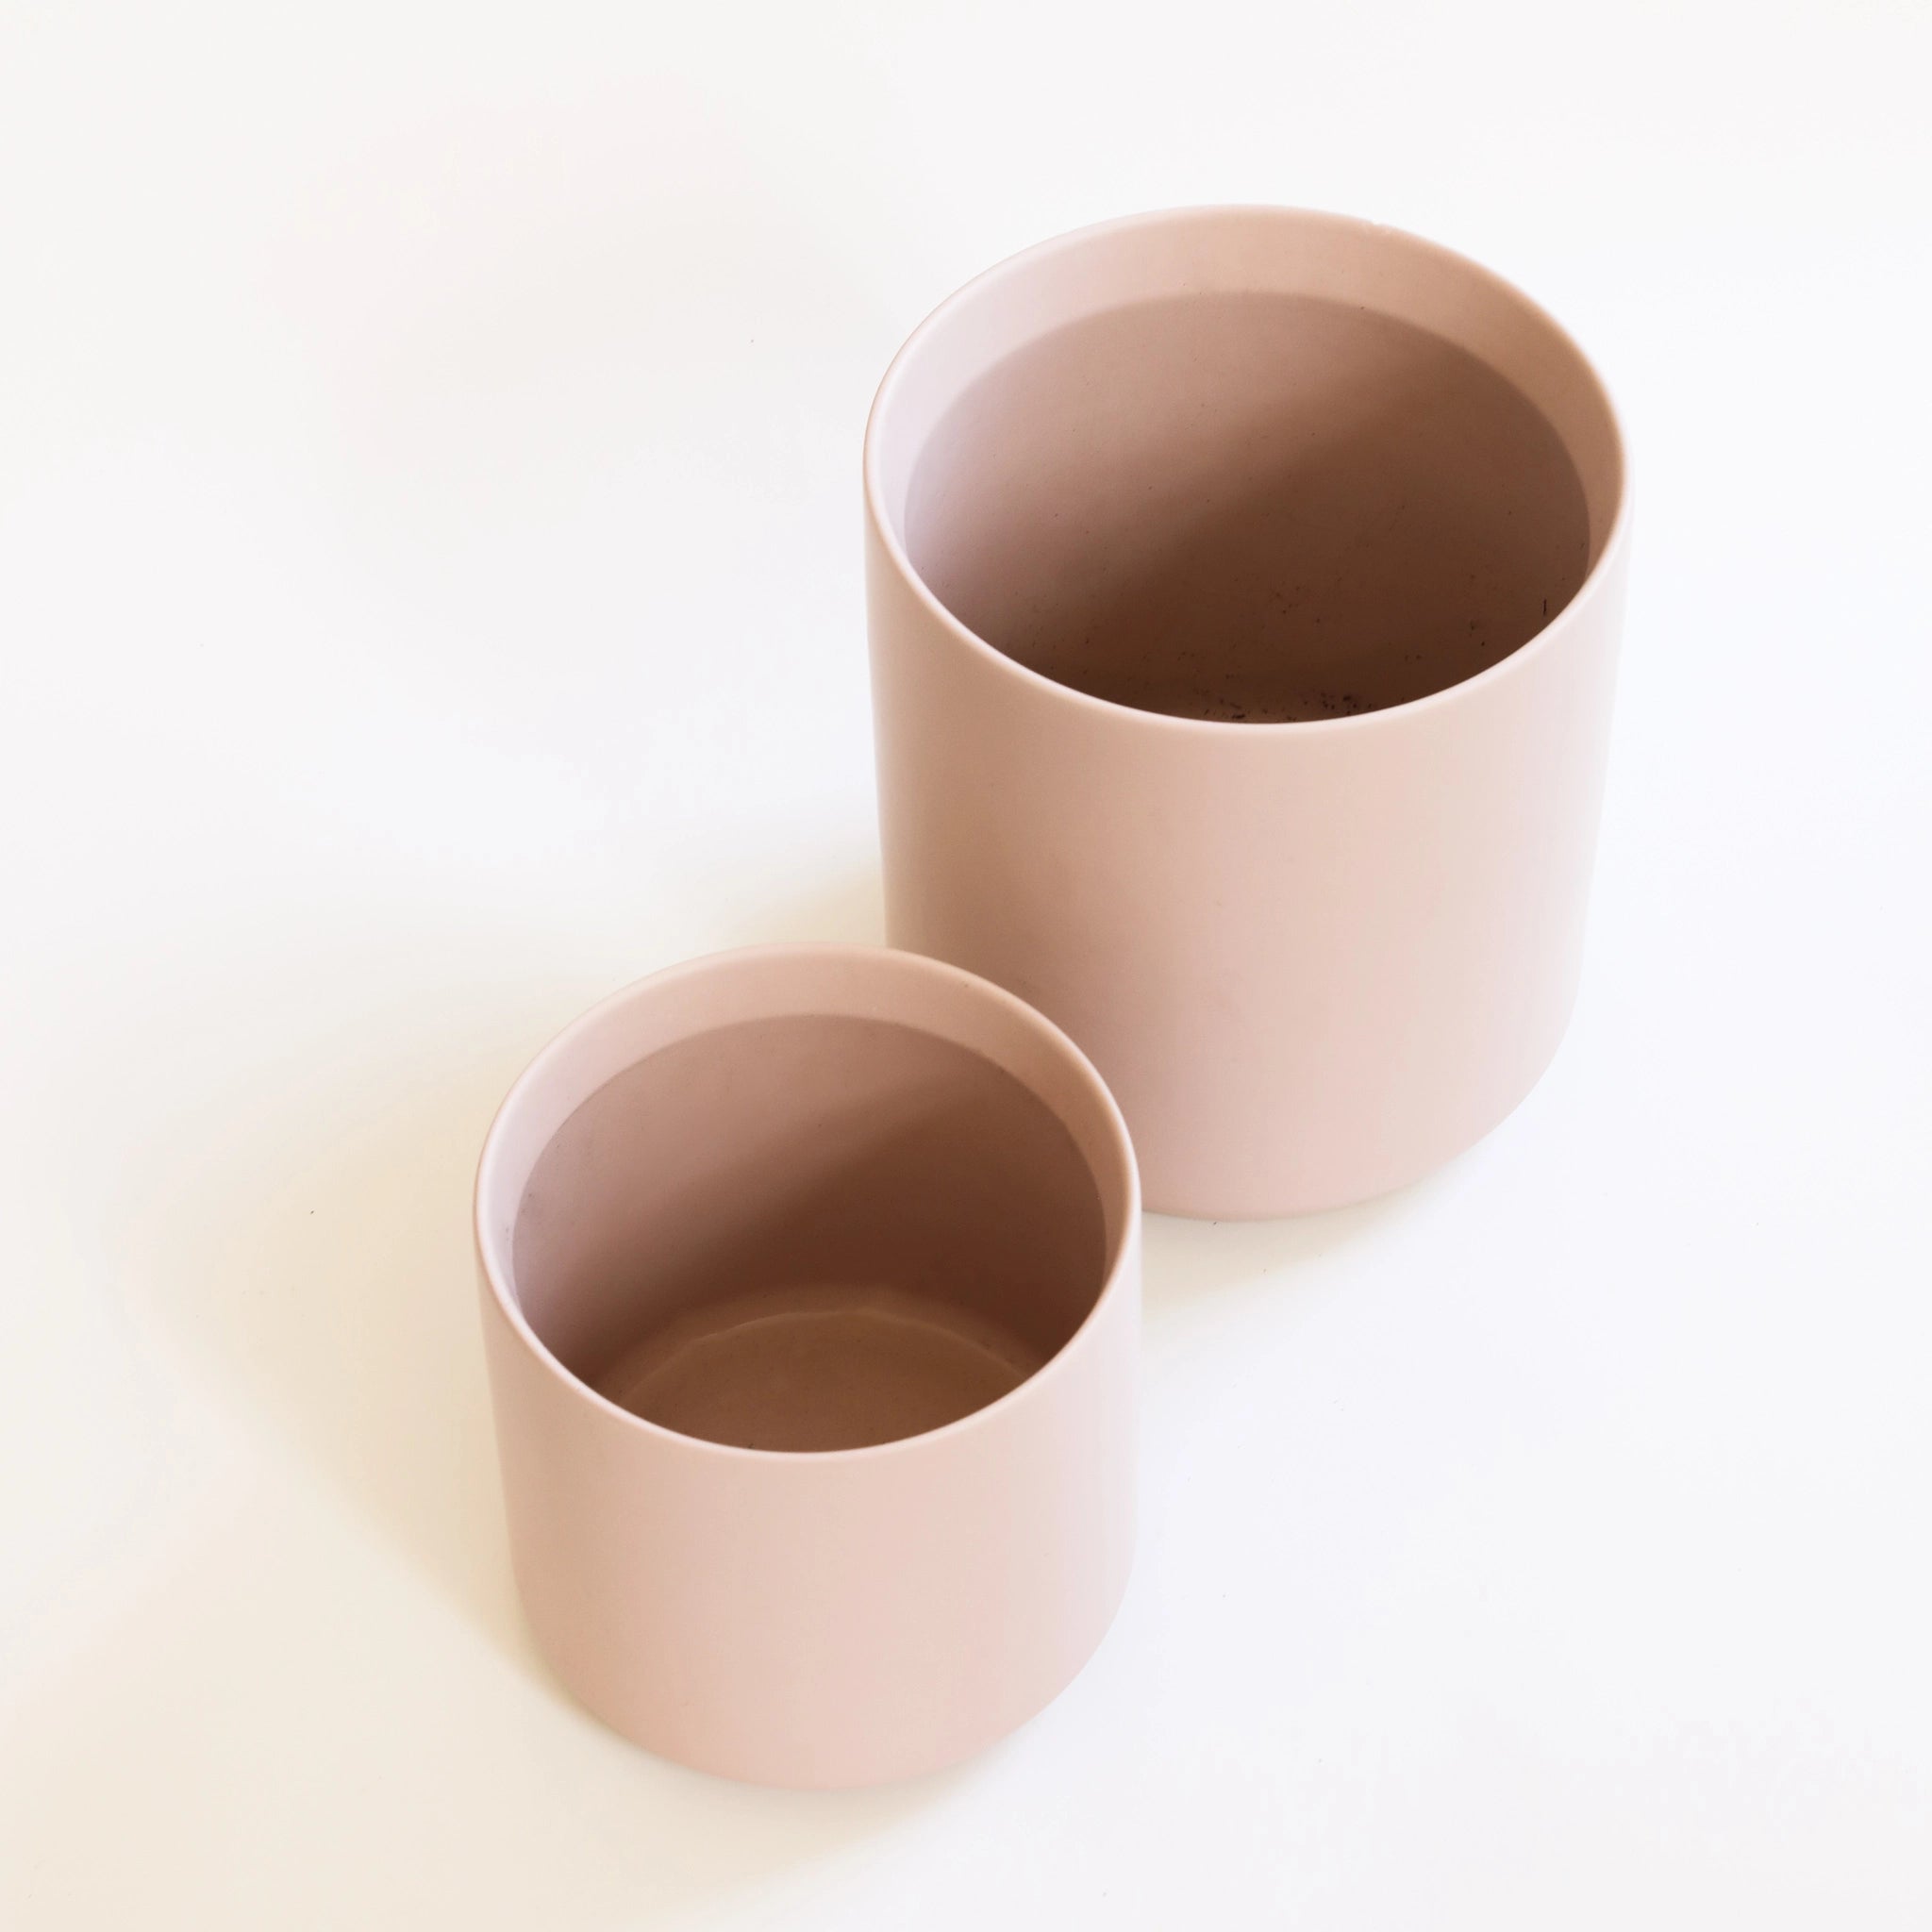 On a cream background is two different sized light pink ceramic planters.